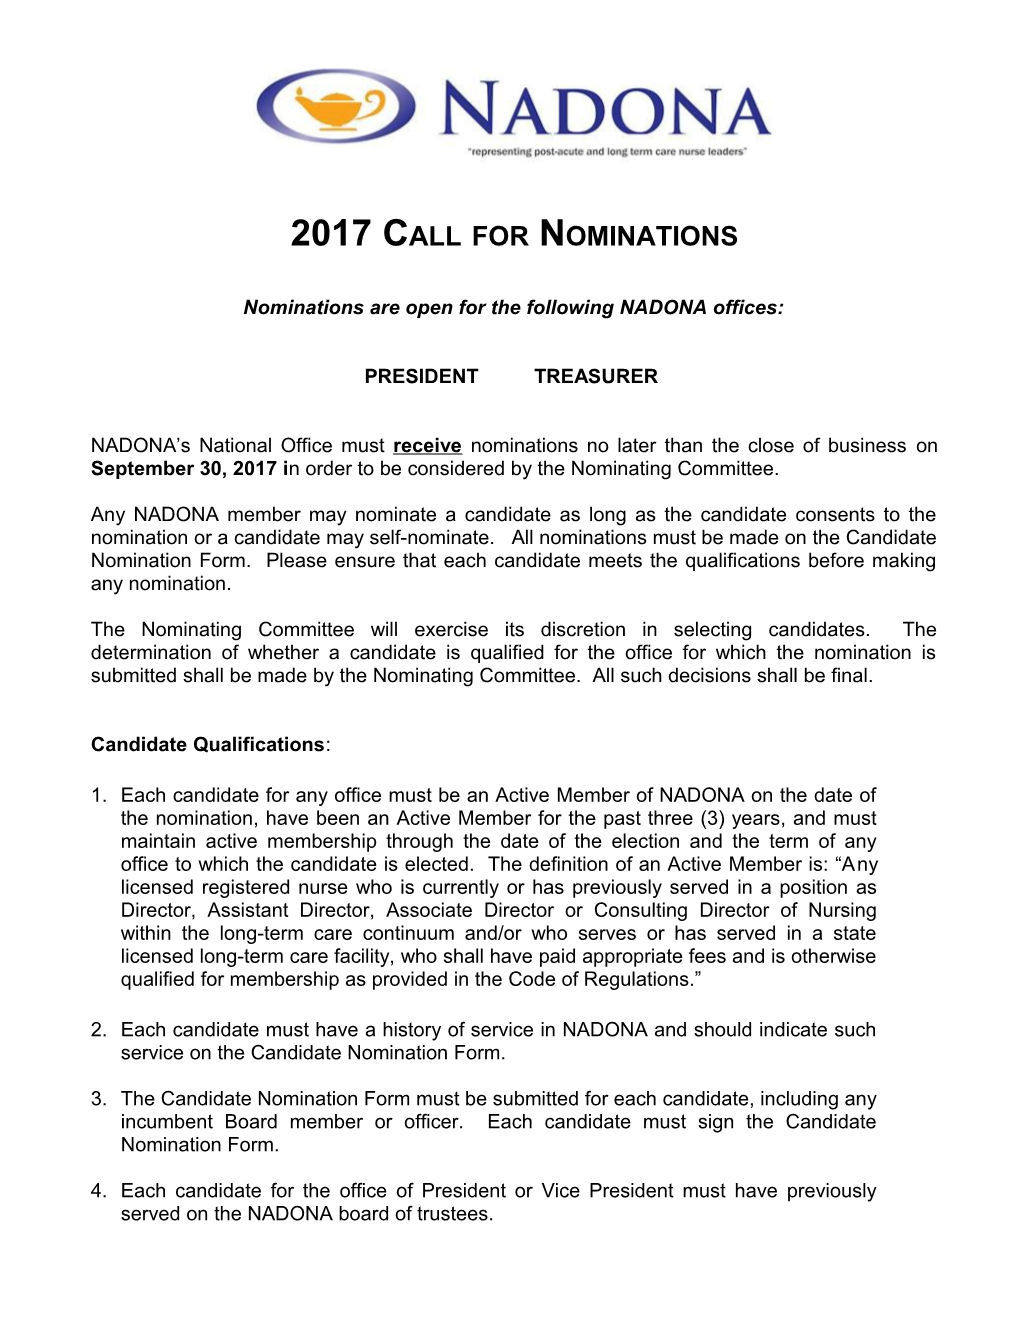 Nominations Are Open for the Following NADONA Offices